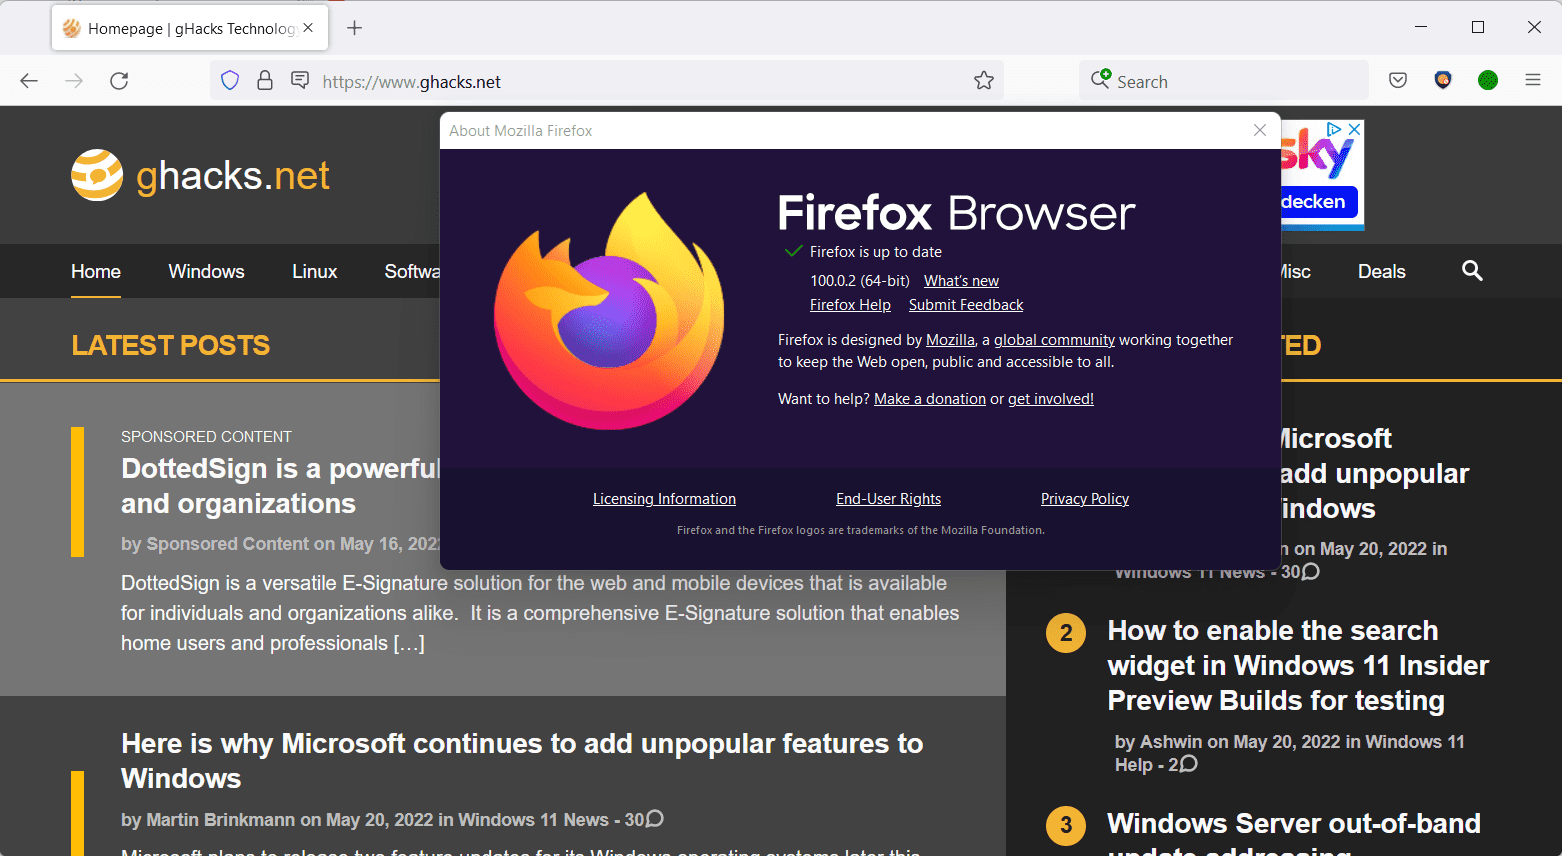 Mozilla patches two critical security issues in Firefox and Thunderbird